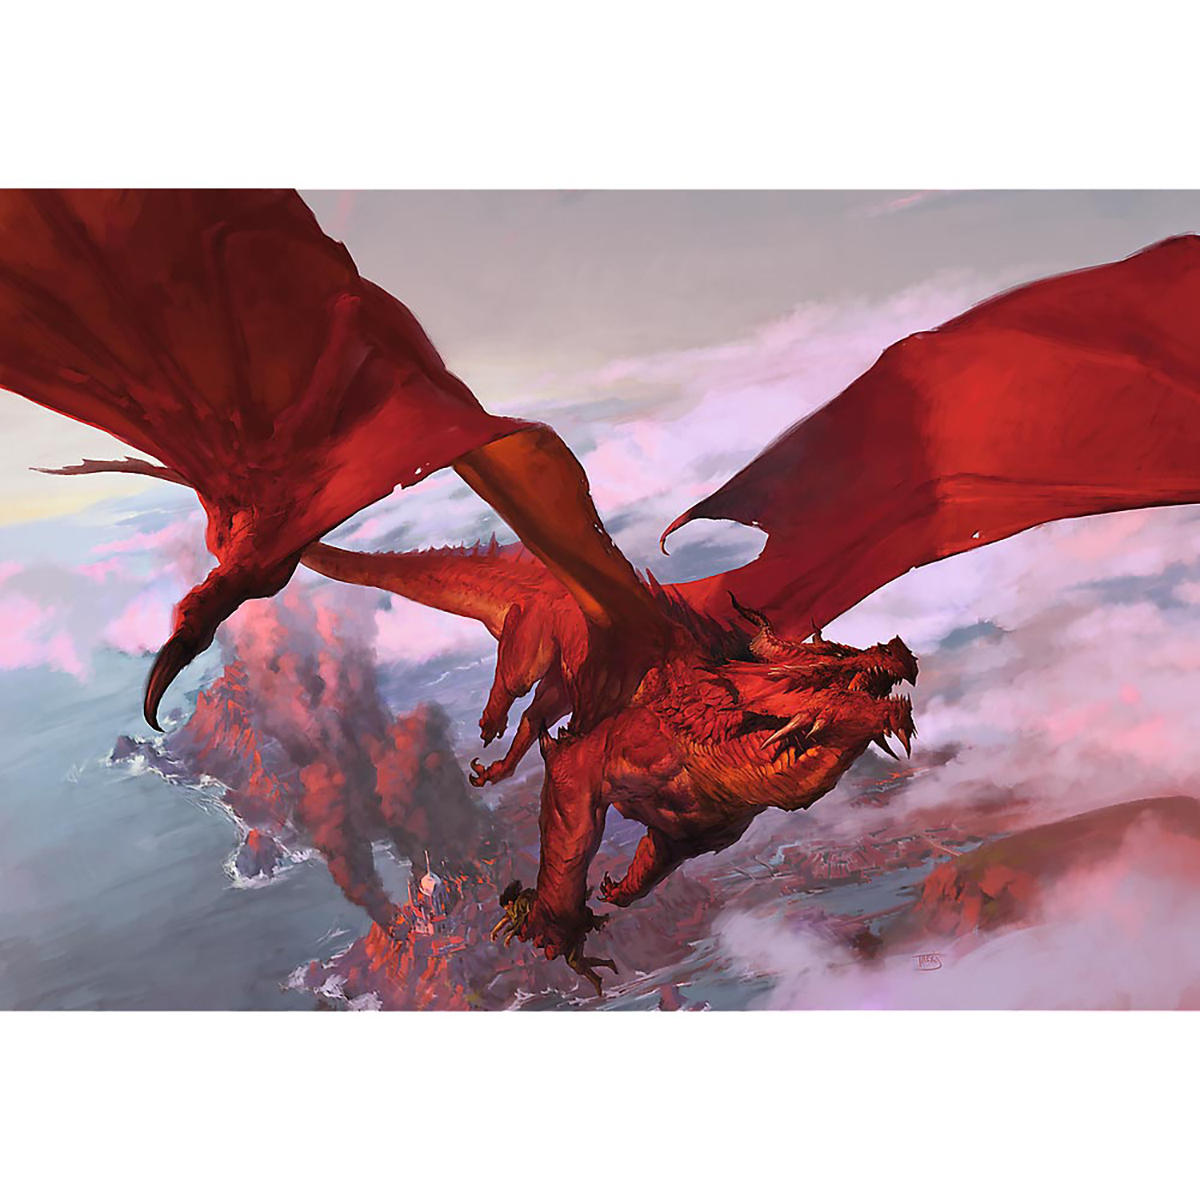 Dungeons TREFL Puzzle Drache Alter Roter Dragons: &